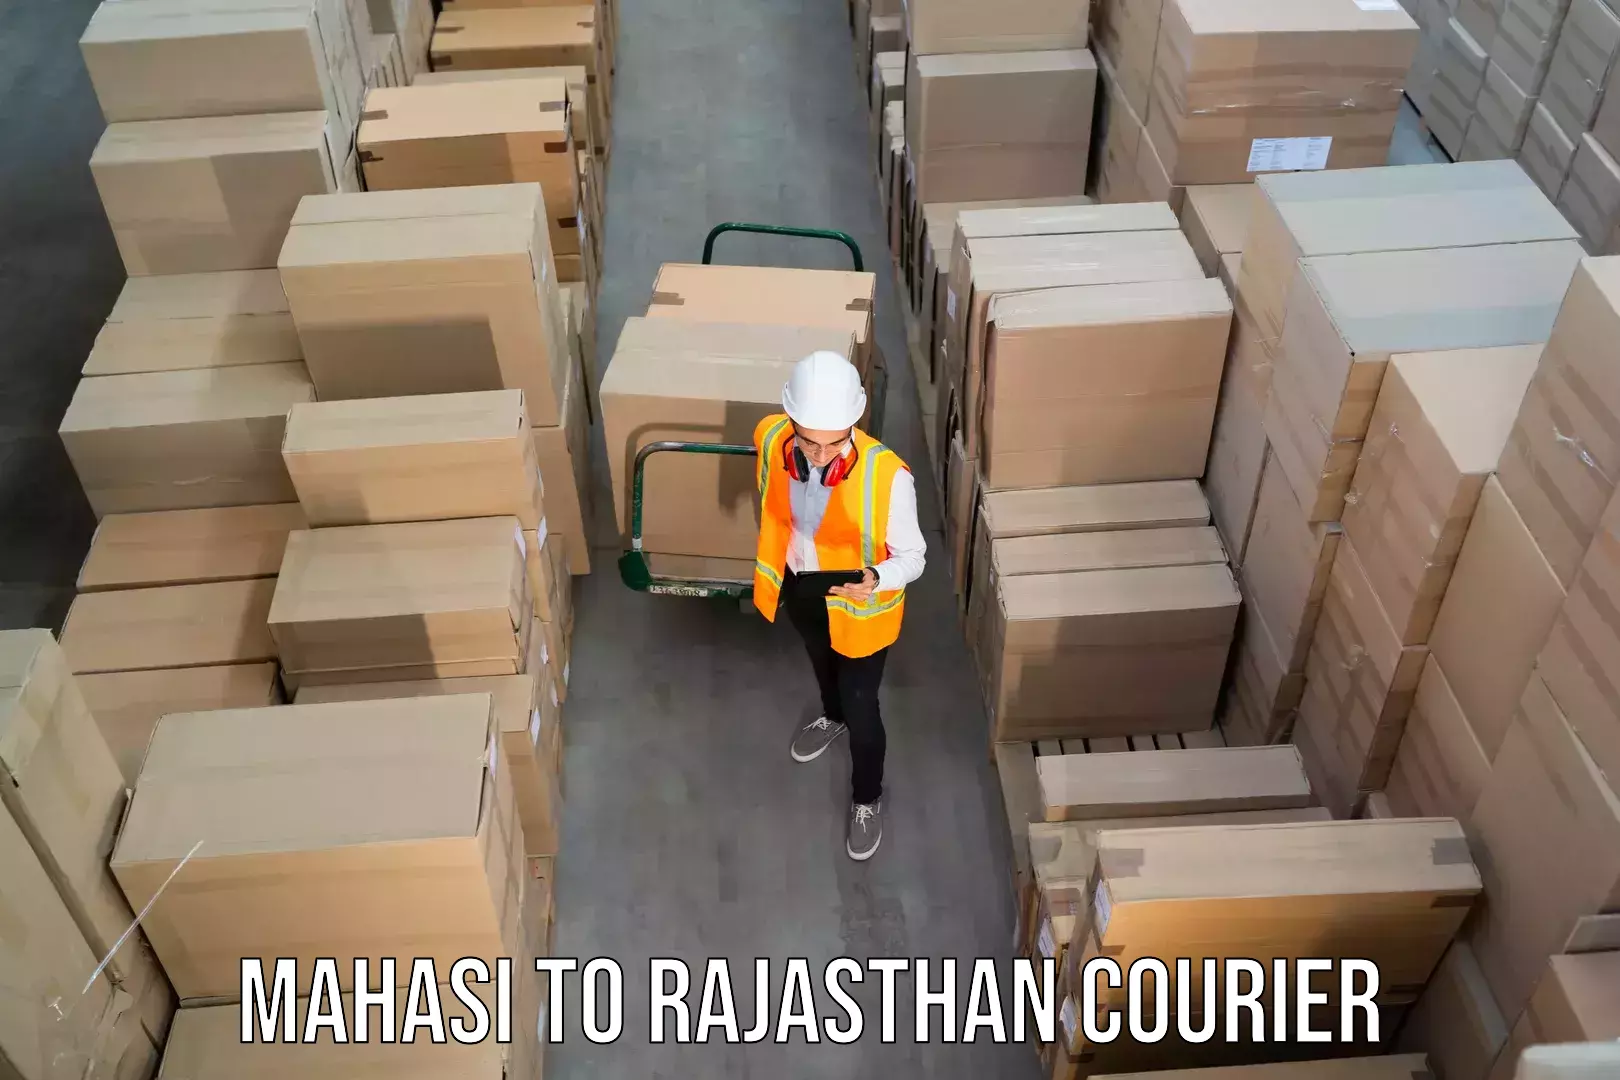 Global courier networks Mahasi to Rajasthan